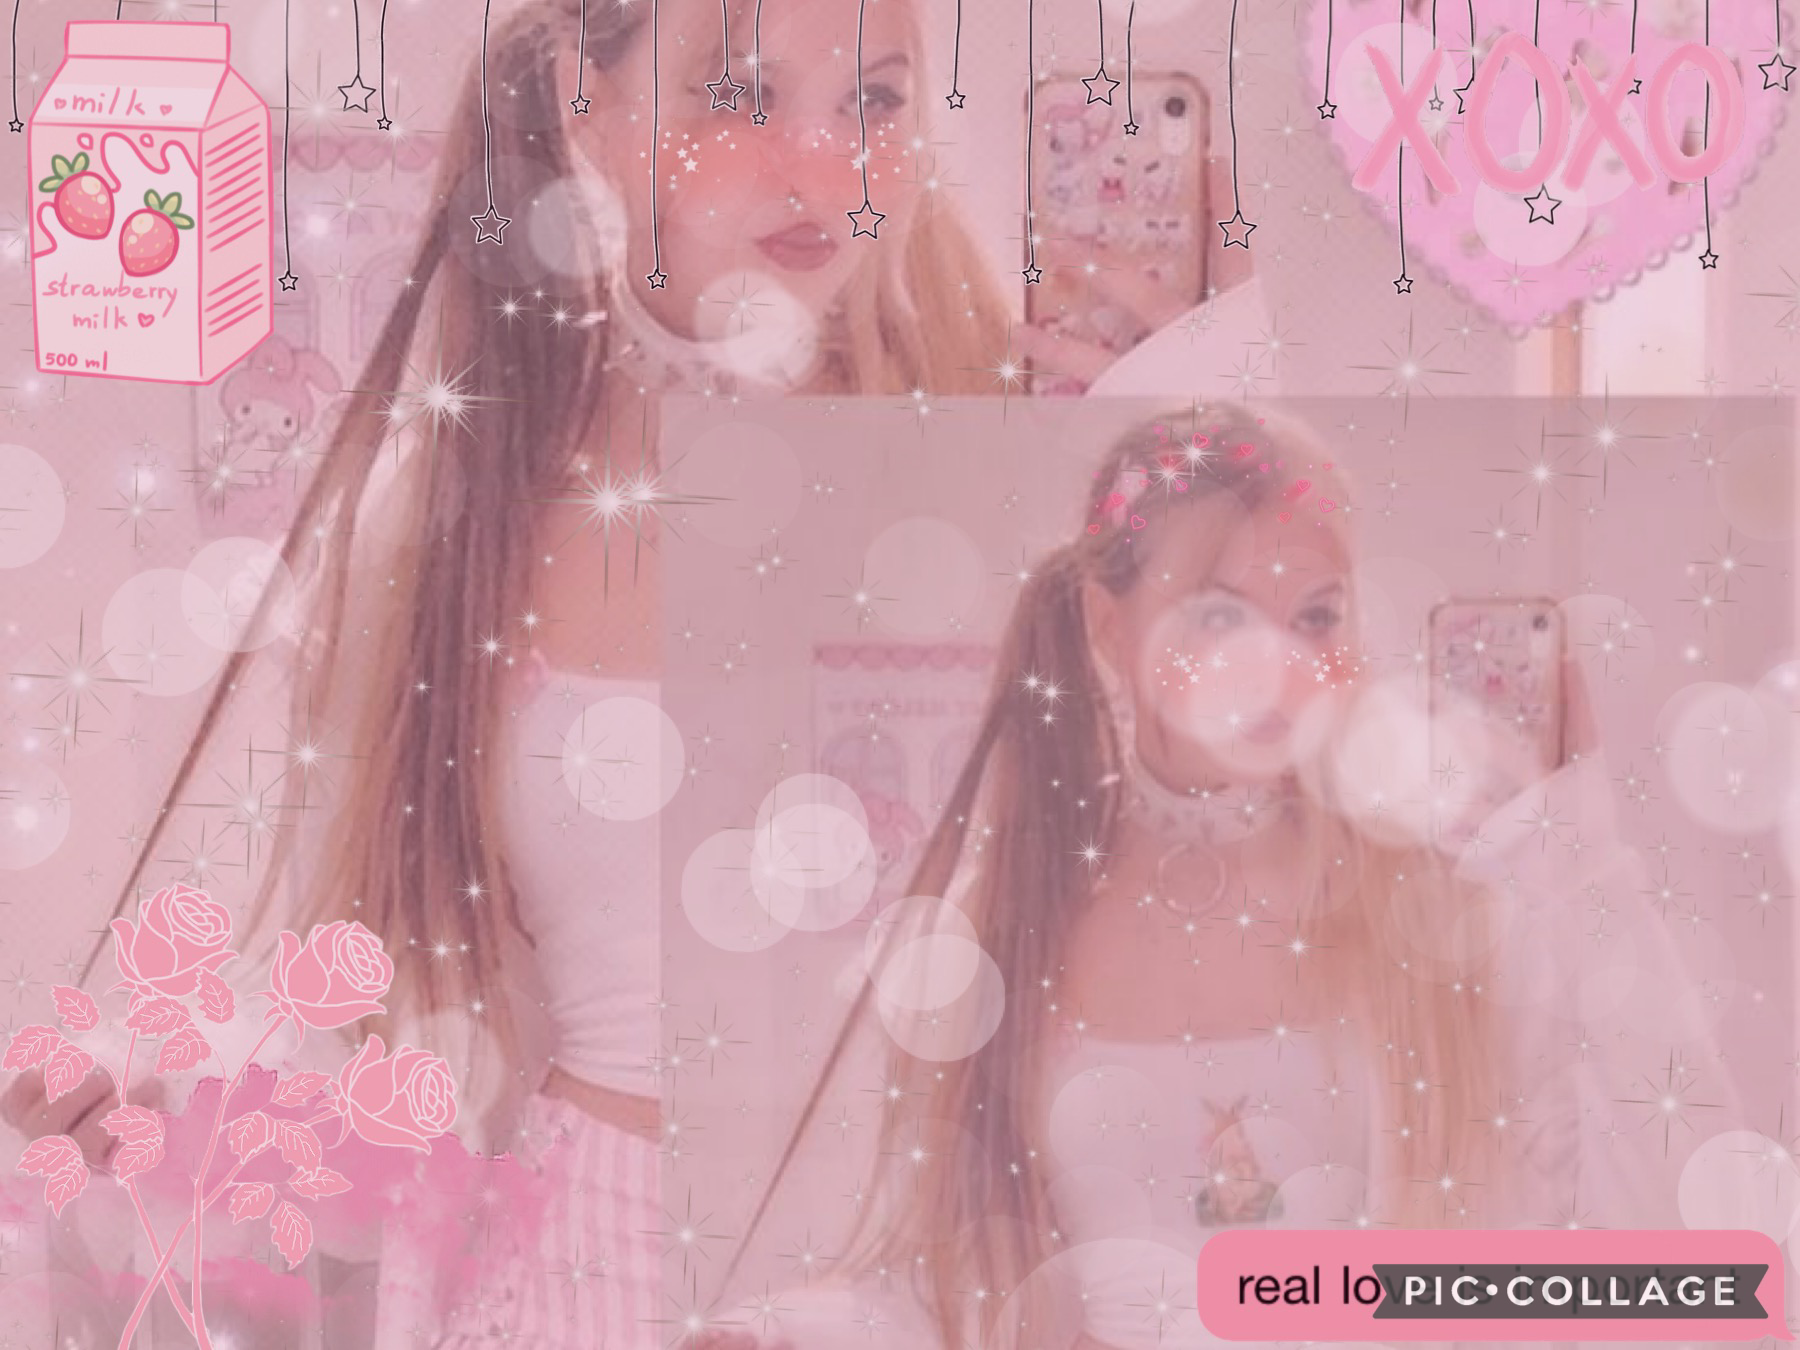 💖🌷🌸PINK AESTHETIC🌸🌷💖